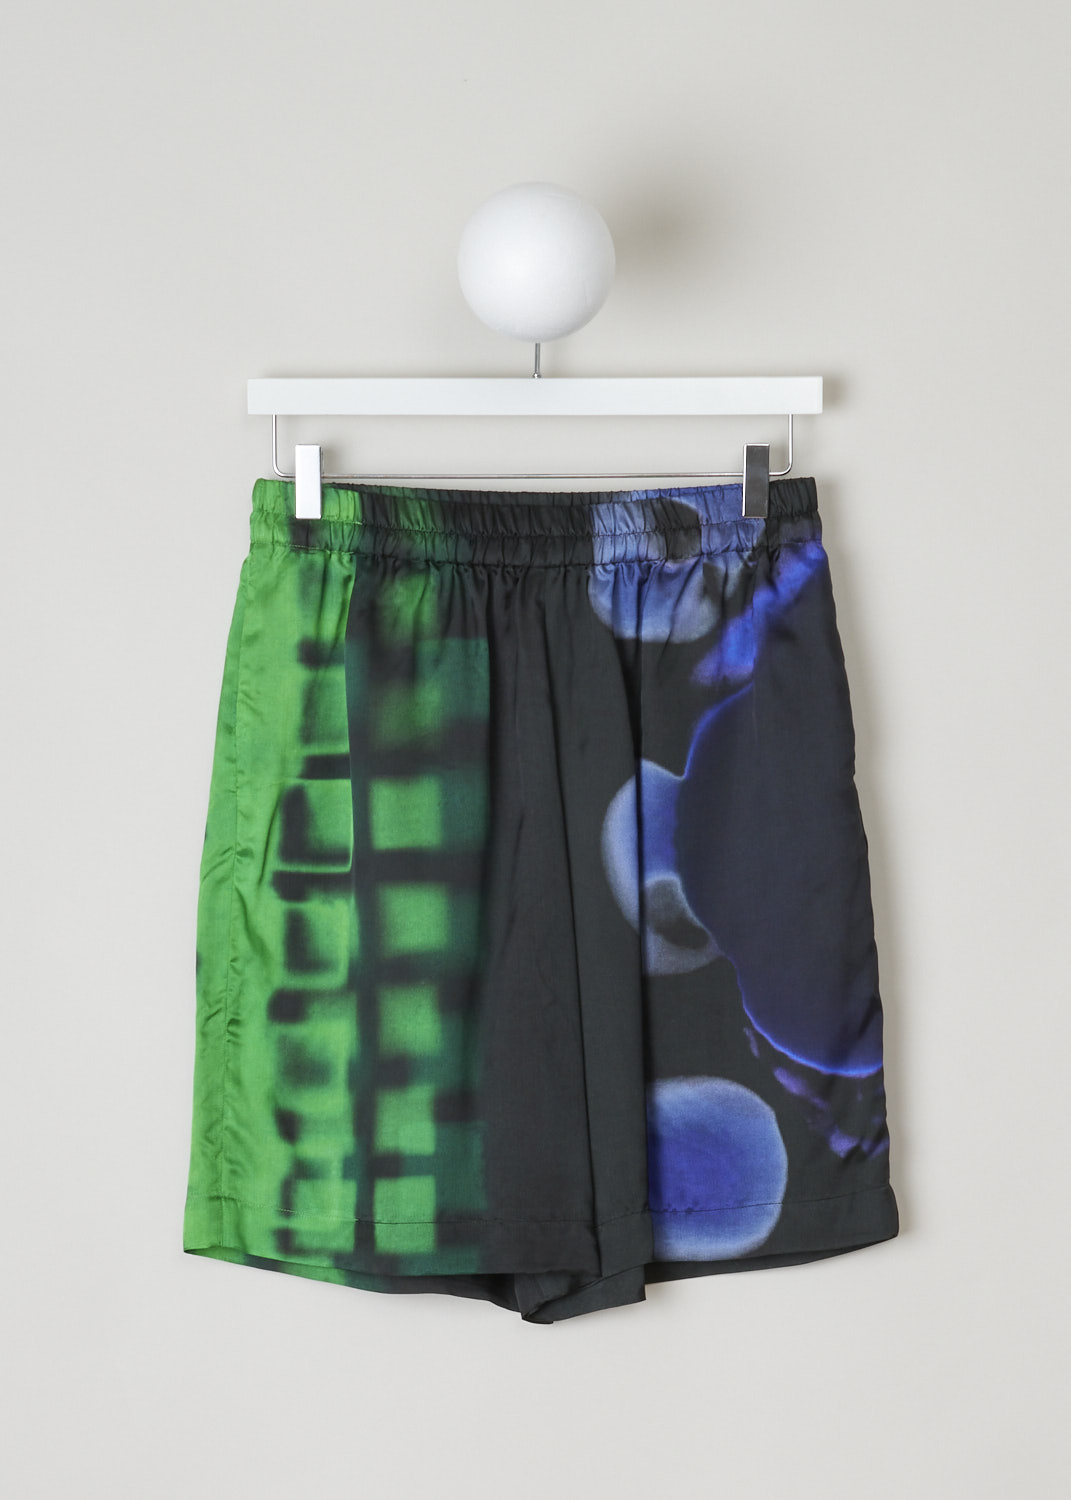 Dries van Noten, Sporty shorts, POMAR_LONG_2068_WW_PANTS_GRE, black green print, front, Viscose twill shorts, decorated with a graphic print coloured in blue, green and a splash of purple. Featuring an elastic waistband with a drawstring. Furthermore, this model comes with a high-waist and loose fit, concealed pockets can be found on the side seam and has a single jetted pocket on the back.